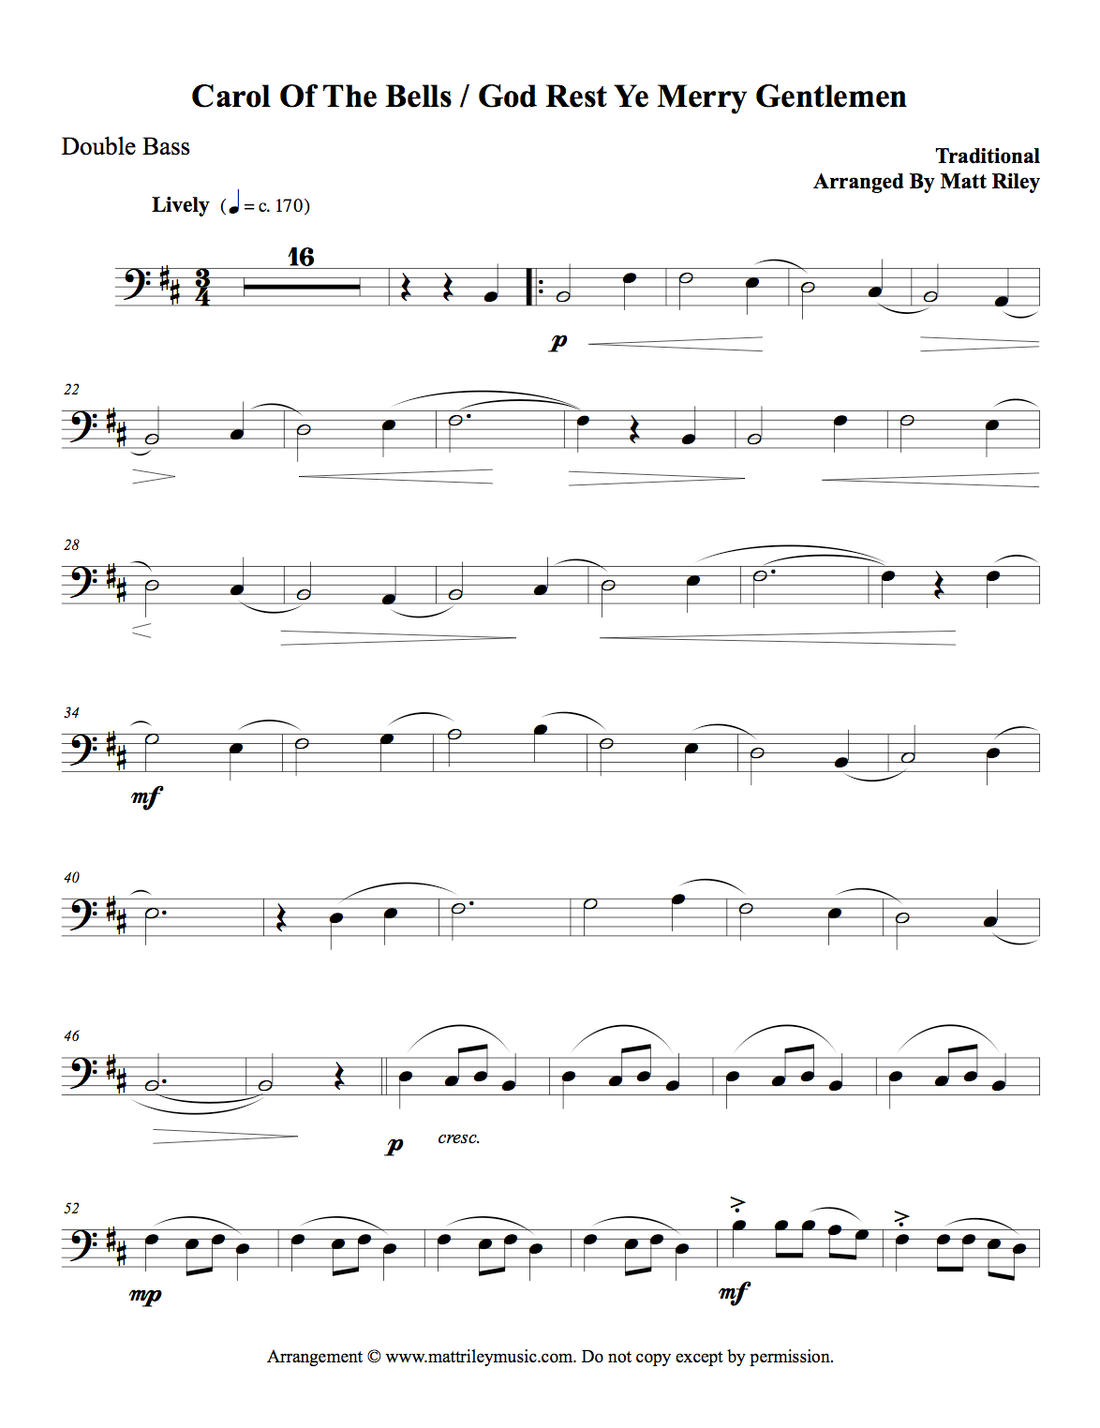 Double Bass Page 1 Preview
